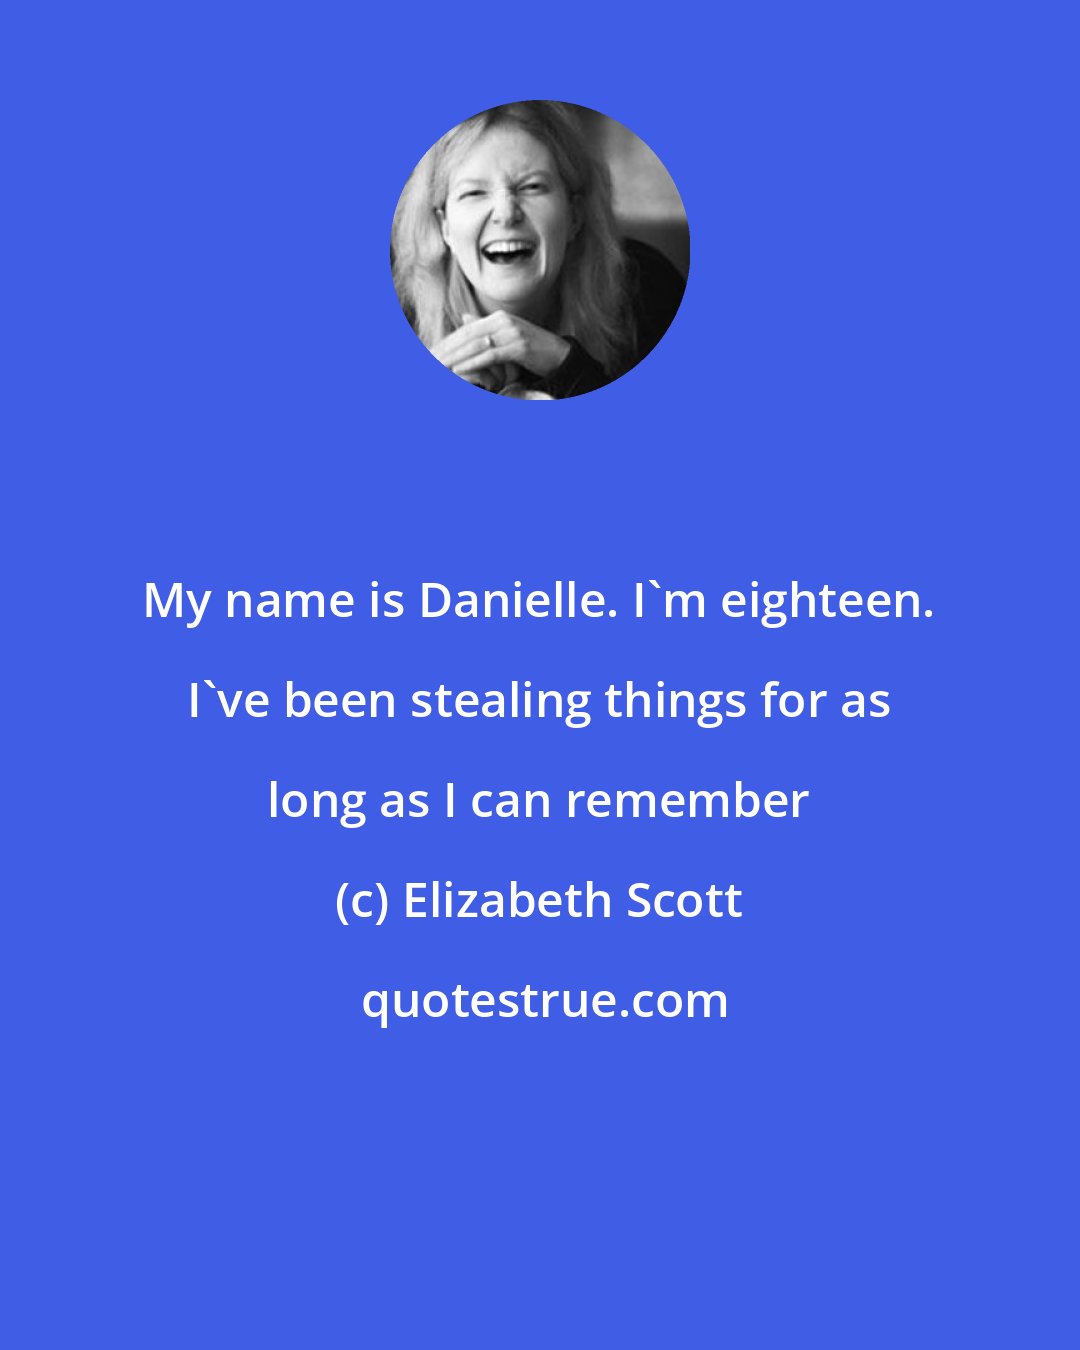 Elizabeth Scott: My name is Danielle. I'm eighteen. I've been stealing things for as long as I can remember